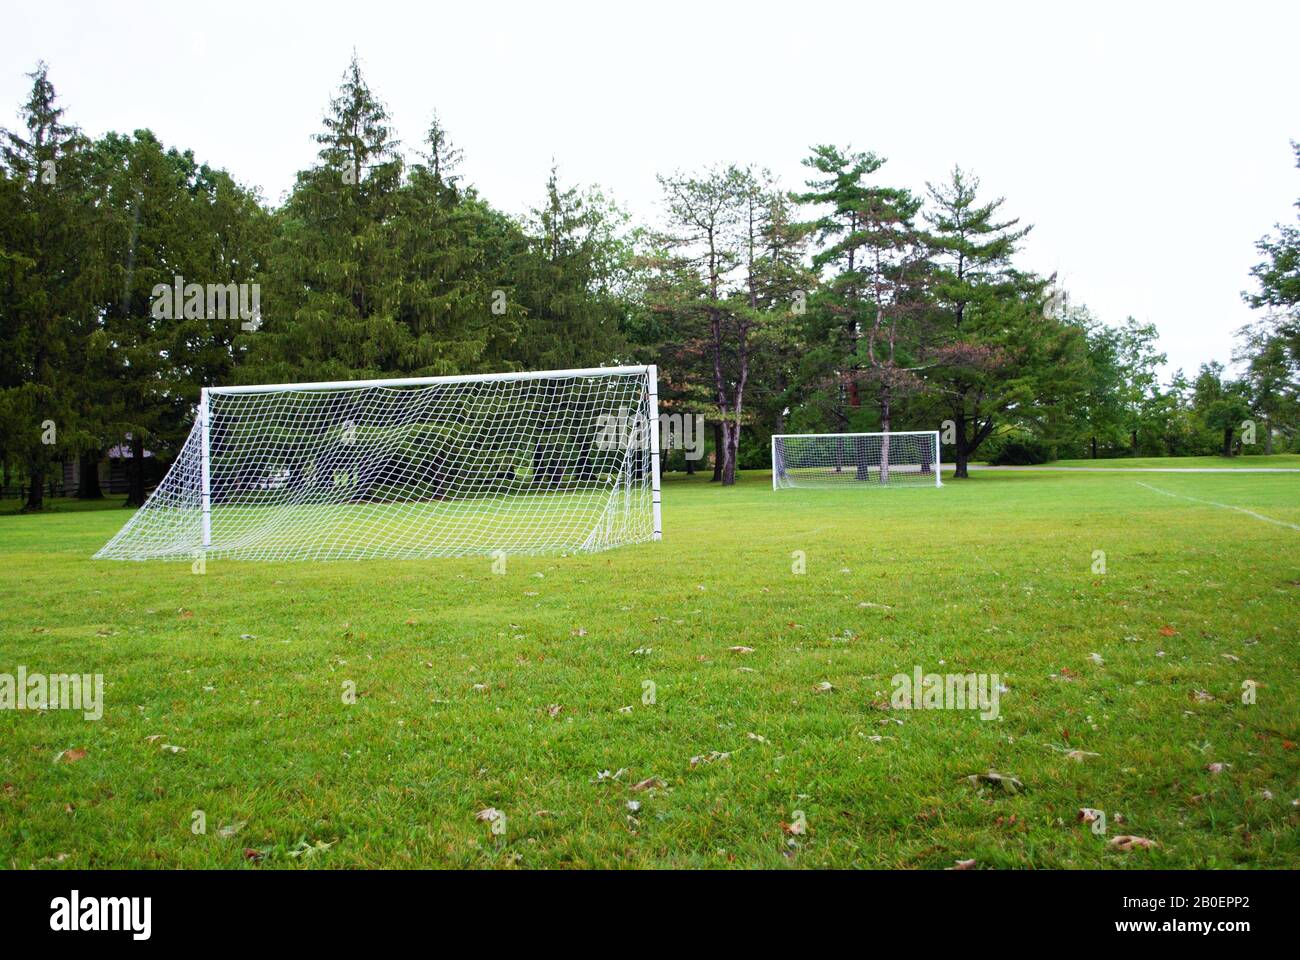 empty soccer field football pitch in a park Stock Photo